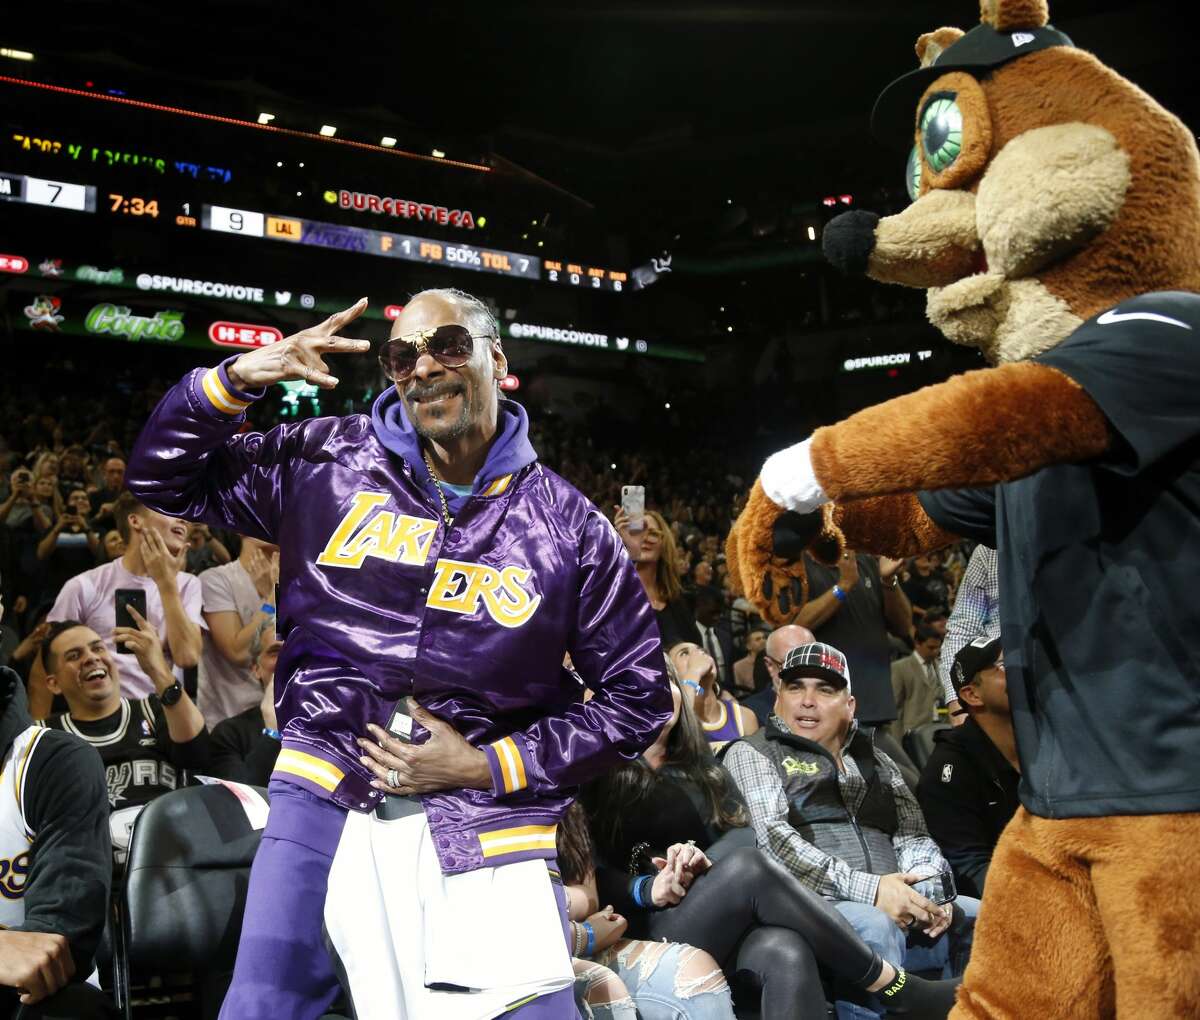 SAN ANTONIO,TX - NOVEMBER 03: Snoop Dogg reacts after being given a spurs t-shirt by San Antonio Spurs Coyote at AT&T Center on November 03, 2019 in San Antonio, Texas. NOTE TO USER: User expressly acknowledges and agrees that , by downloading and or using this photograph, User is consenting to the terms and conditions of the Getty Images License Agreement. (Photo by Ronald Cortes/Getty Images)